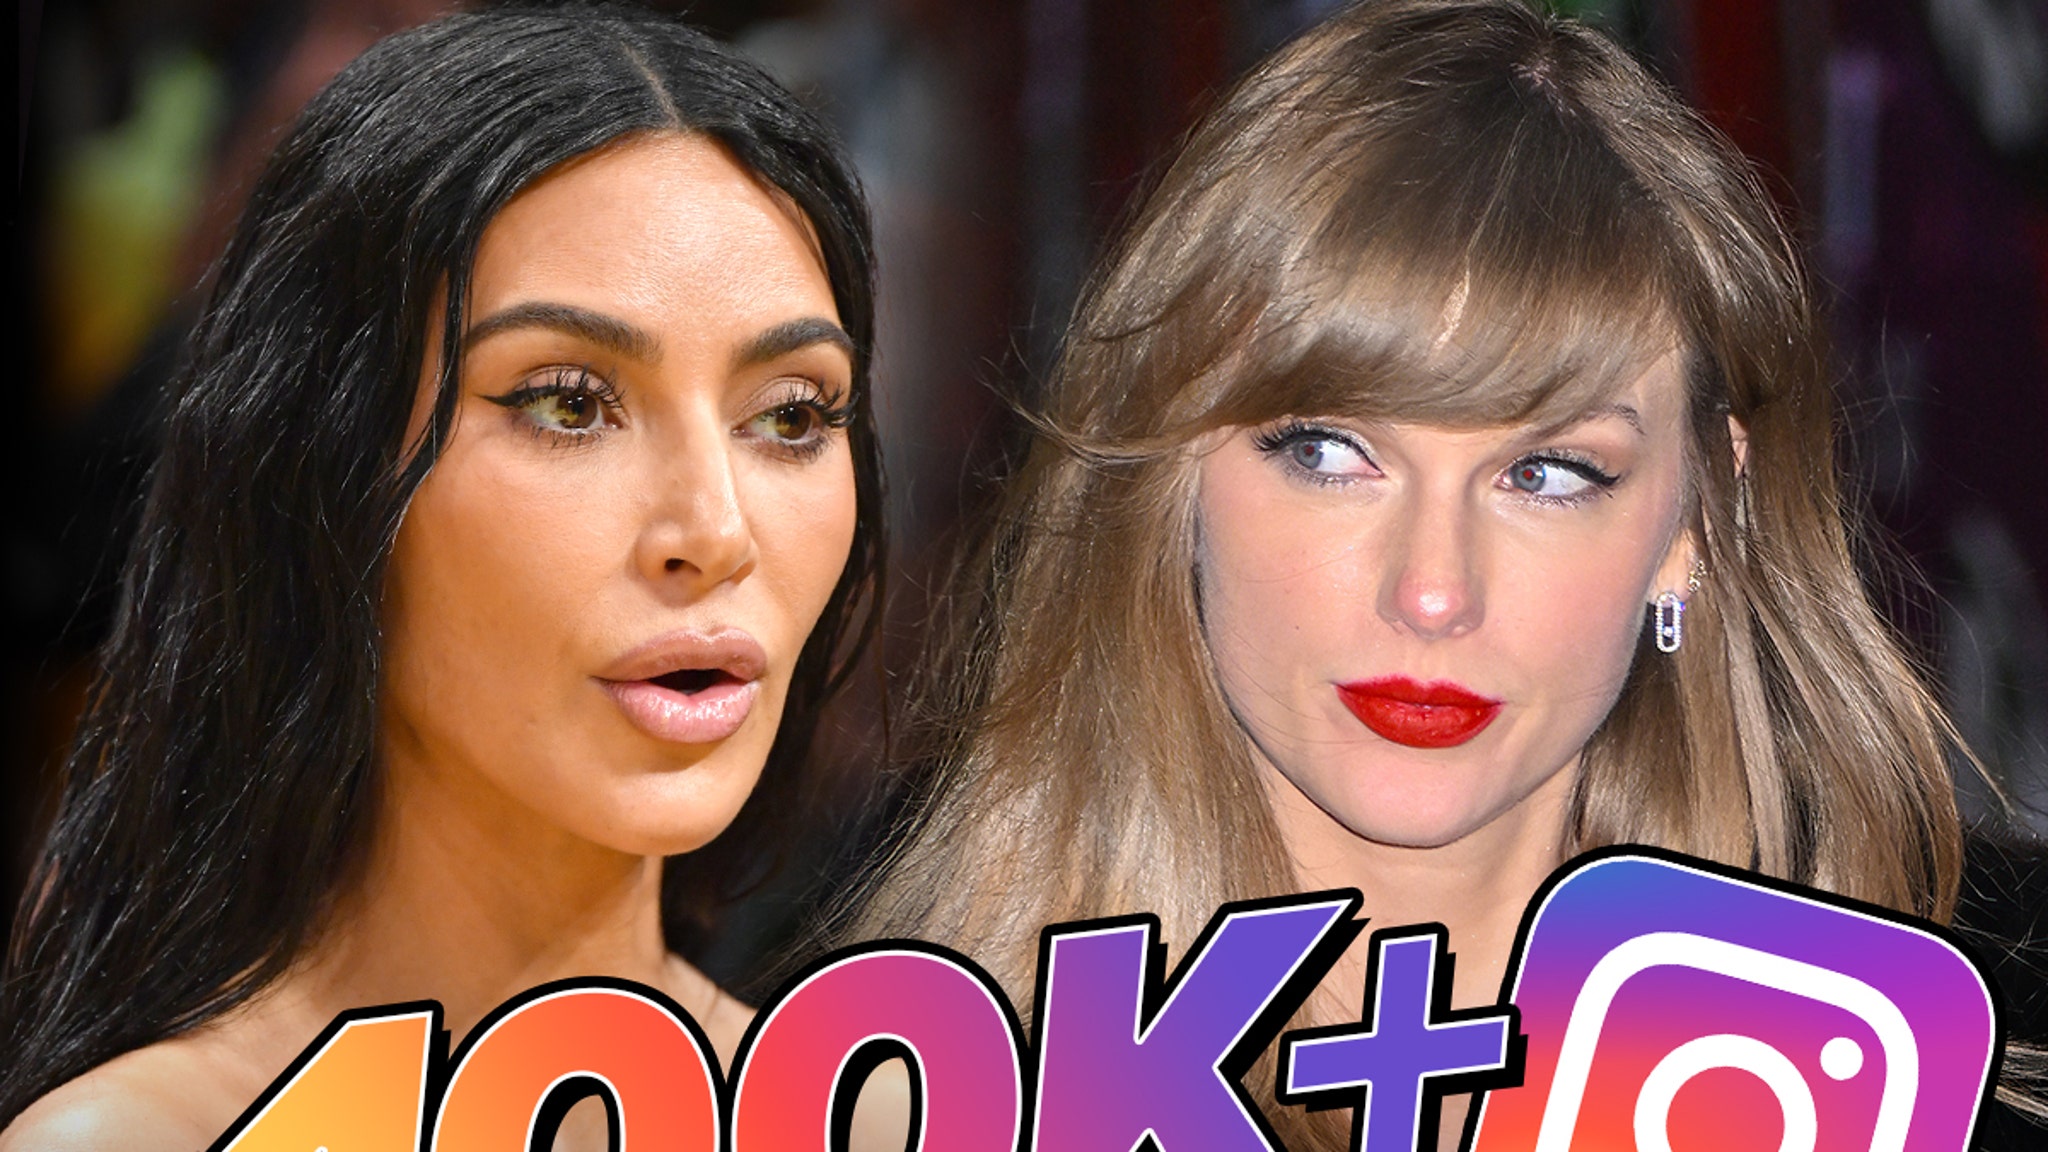 Kim Kardashian Loses Over 100,000 Instagram Followers as Fans of Taylor Swift Fill Comment Section